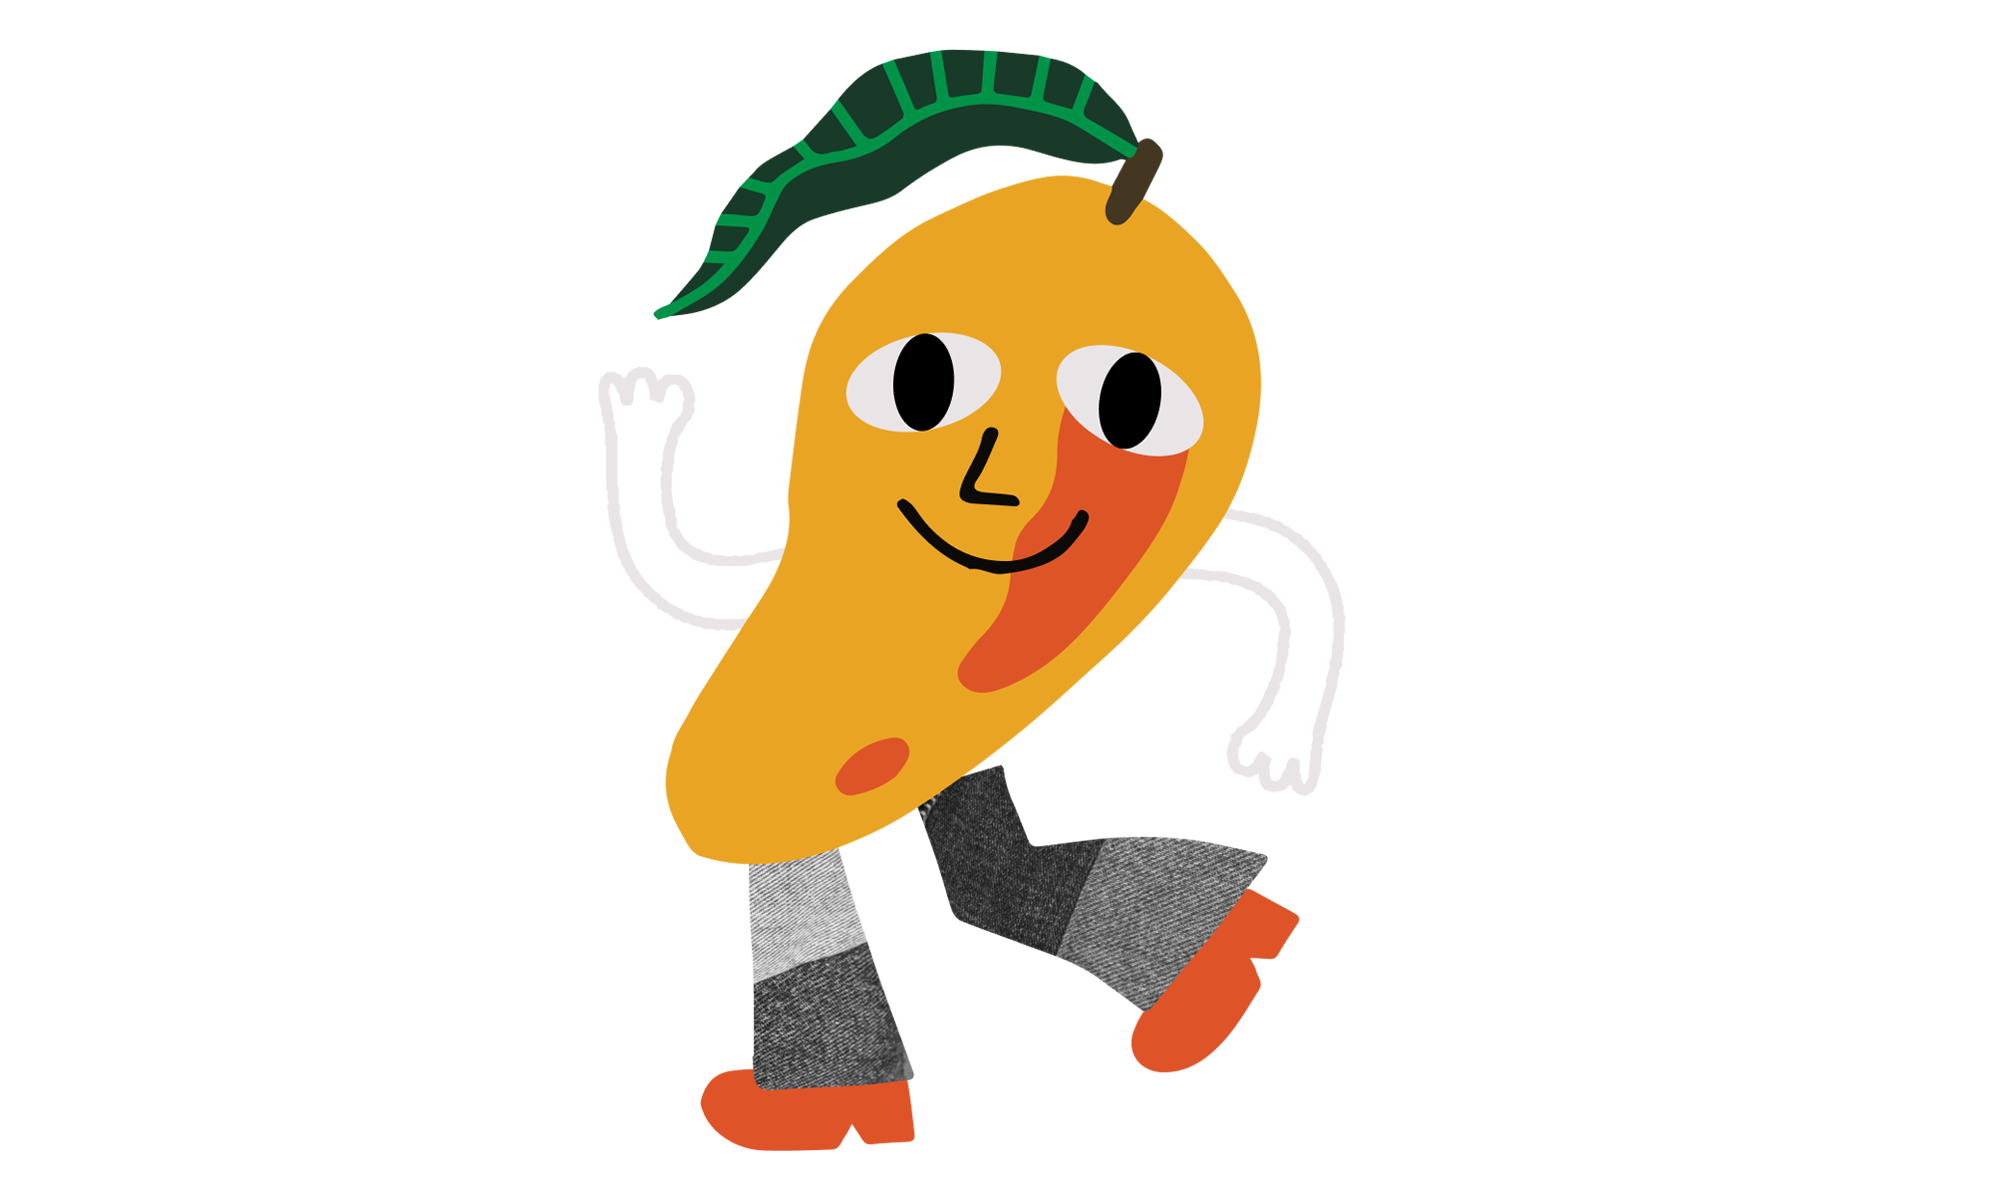 Cool mango graphic. Mango is smiling, has arms in a dancing pose, and is walking. The Mango is wearing pants and orange shoes.